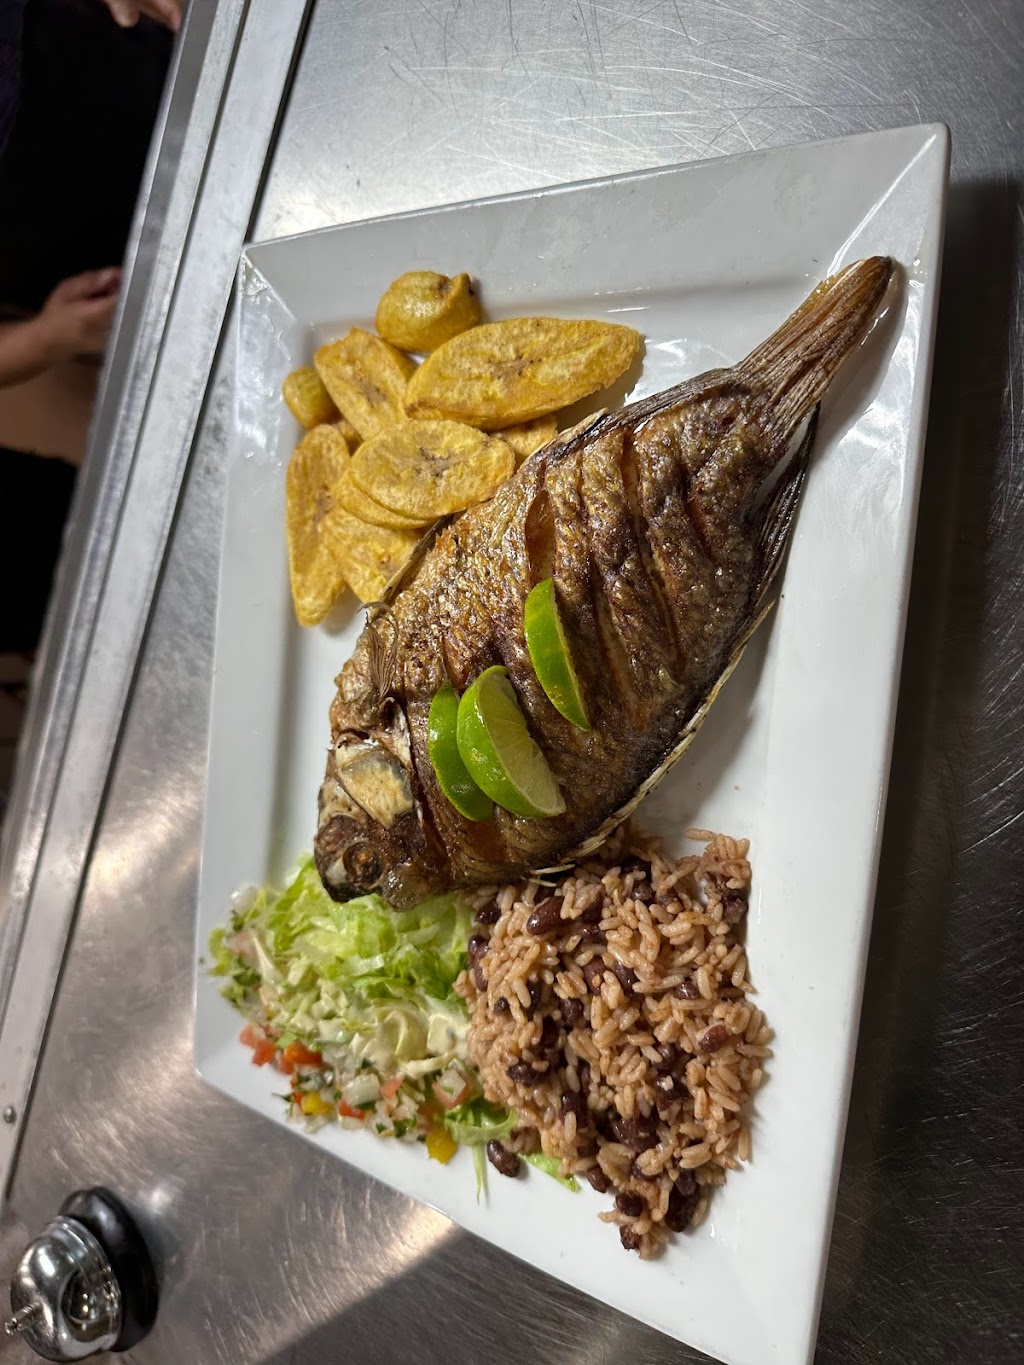 Angelas Restaurant-mexican and latin food | cafe | 5524 South Blvd, Charlotte, NC 28217, USA | 7047339071 OR +1 704-733-9071